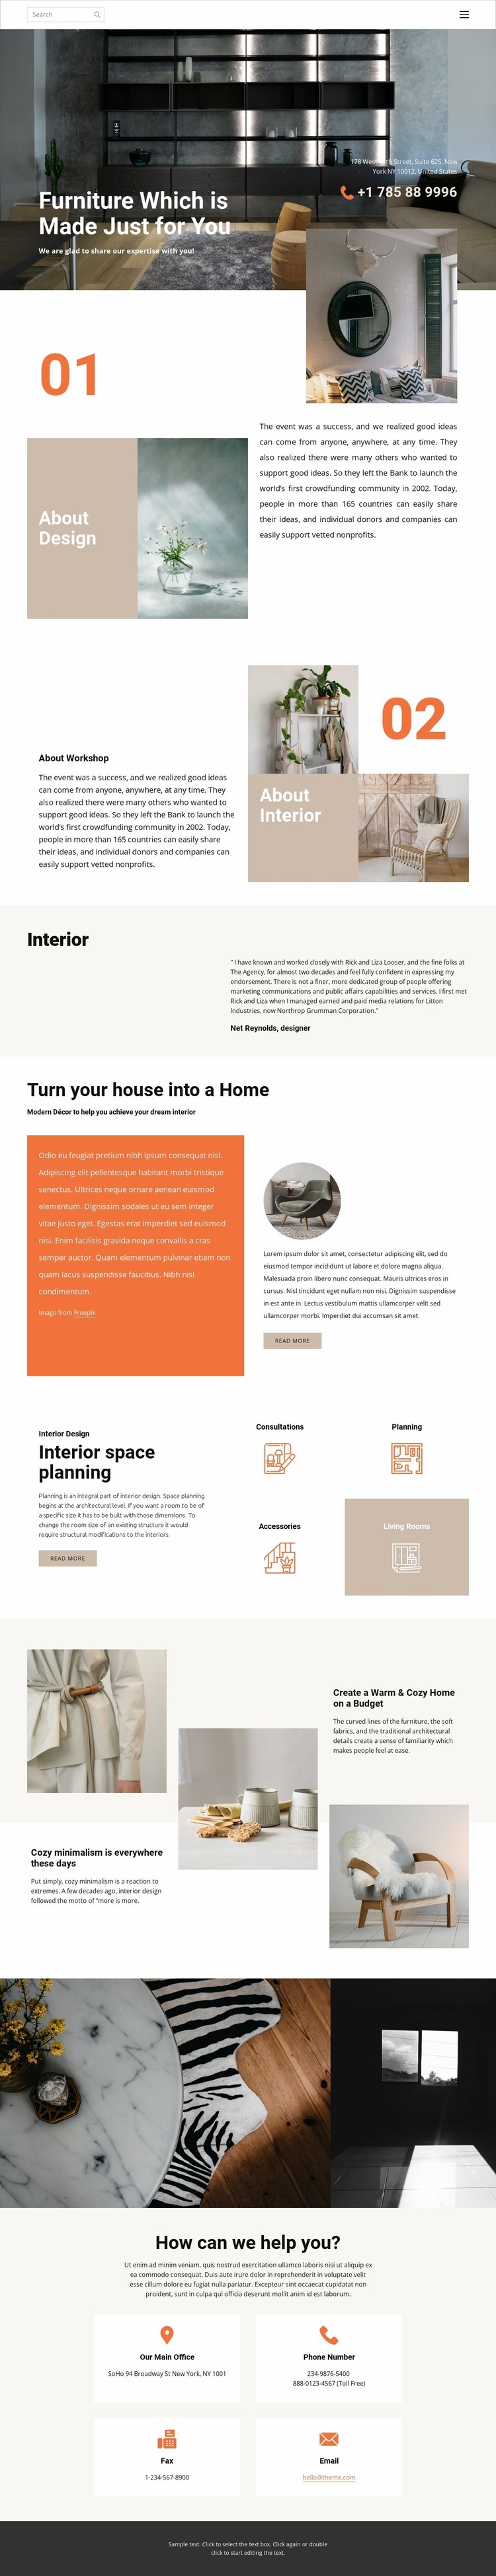 Furniture made just for you Webflow Template Alternative